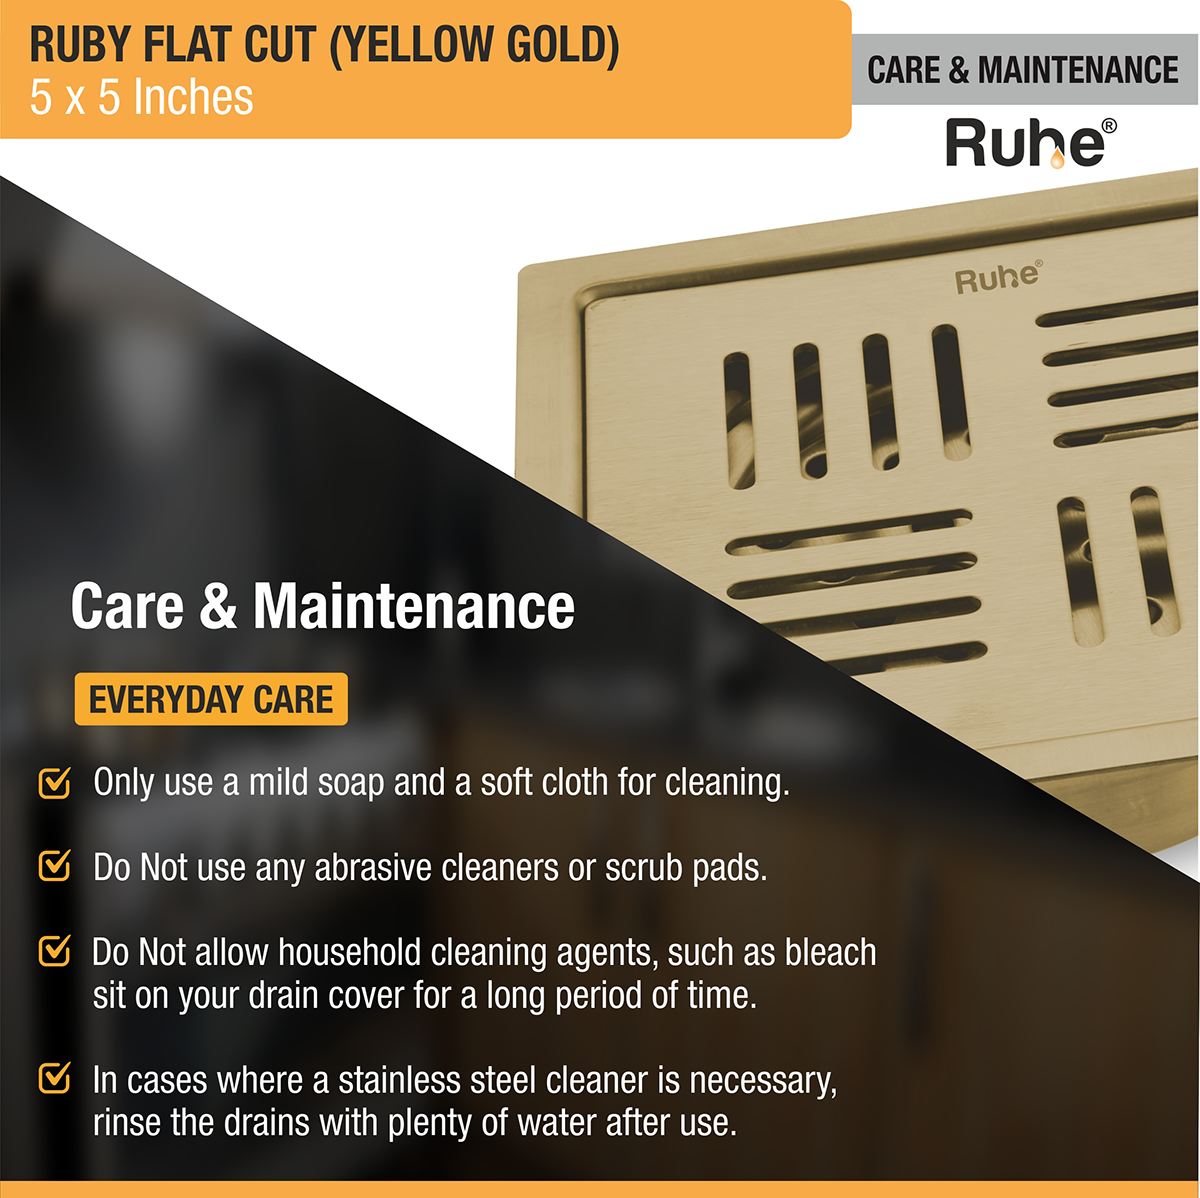 Ruby Square Flat Cut Floor Drain in Yellow Gold PVD Coating (5 x 5 Inches) care and maintenance